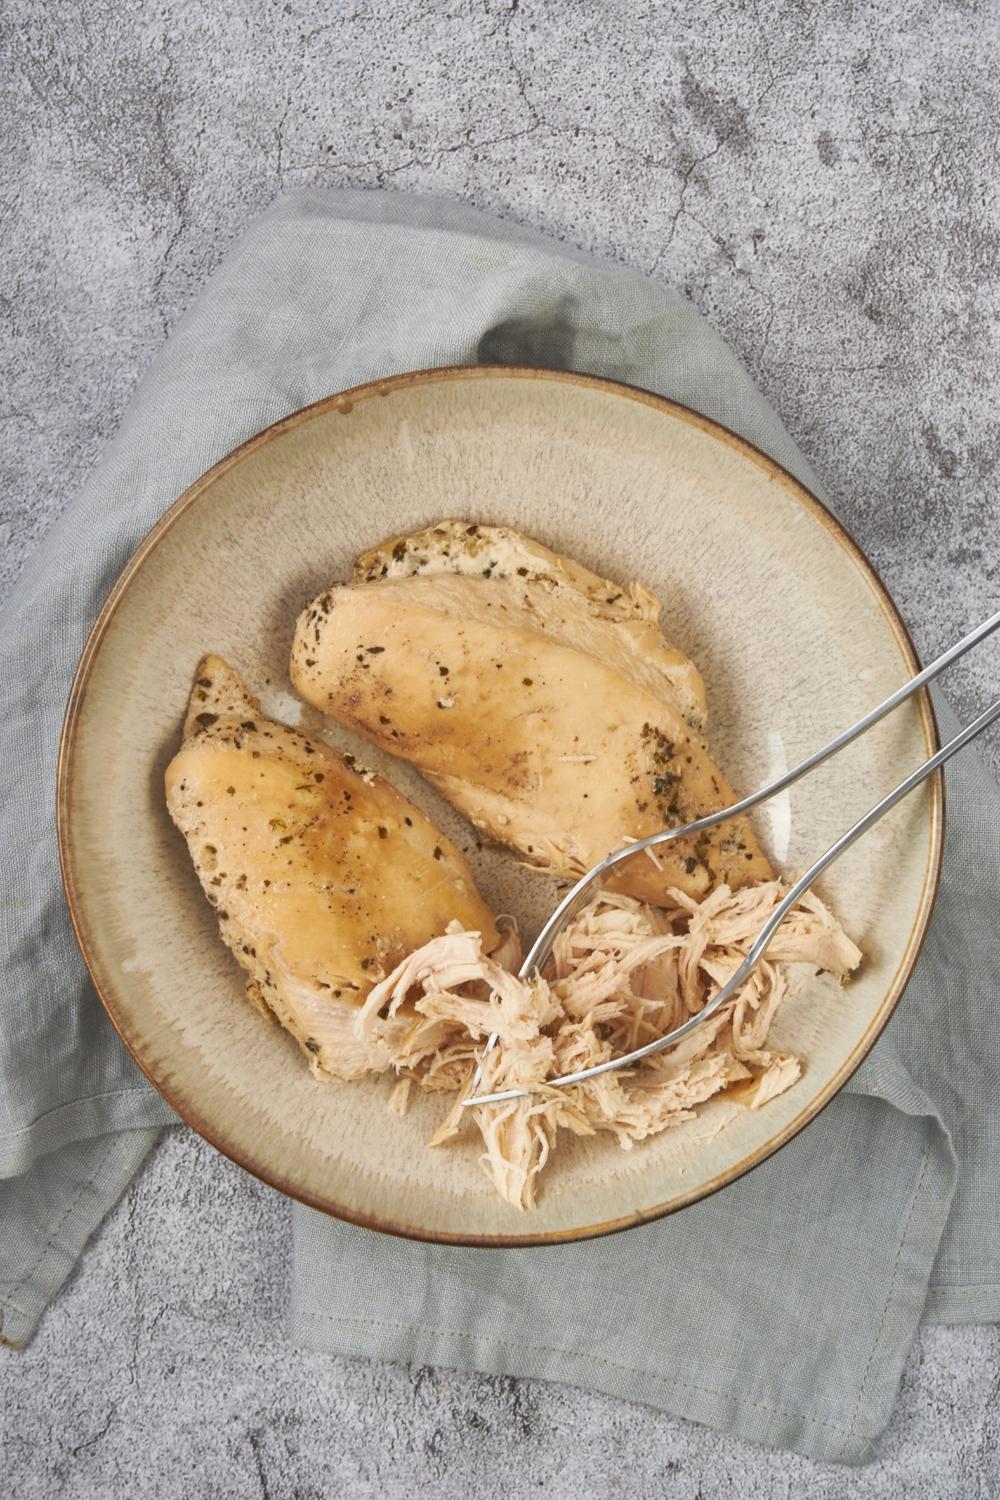 Two seasoned chicken breasts in a bowl with one chicken breast partly shredded using two forks.